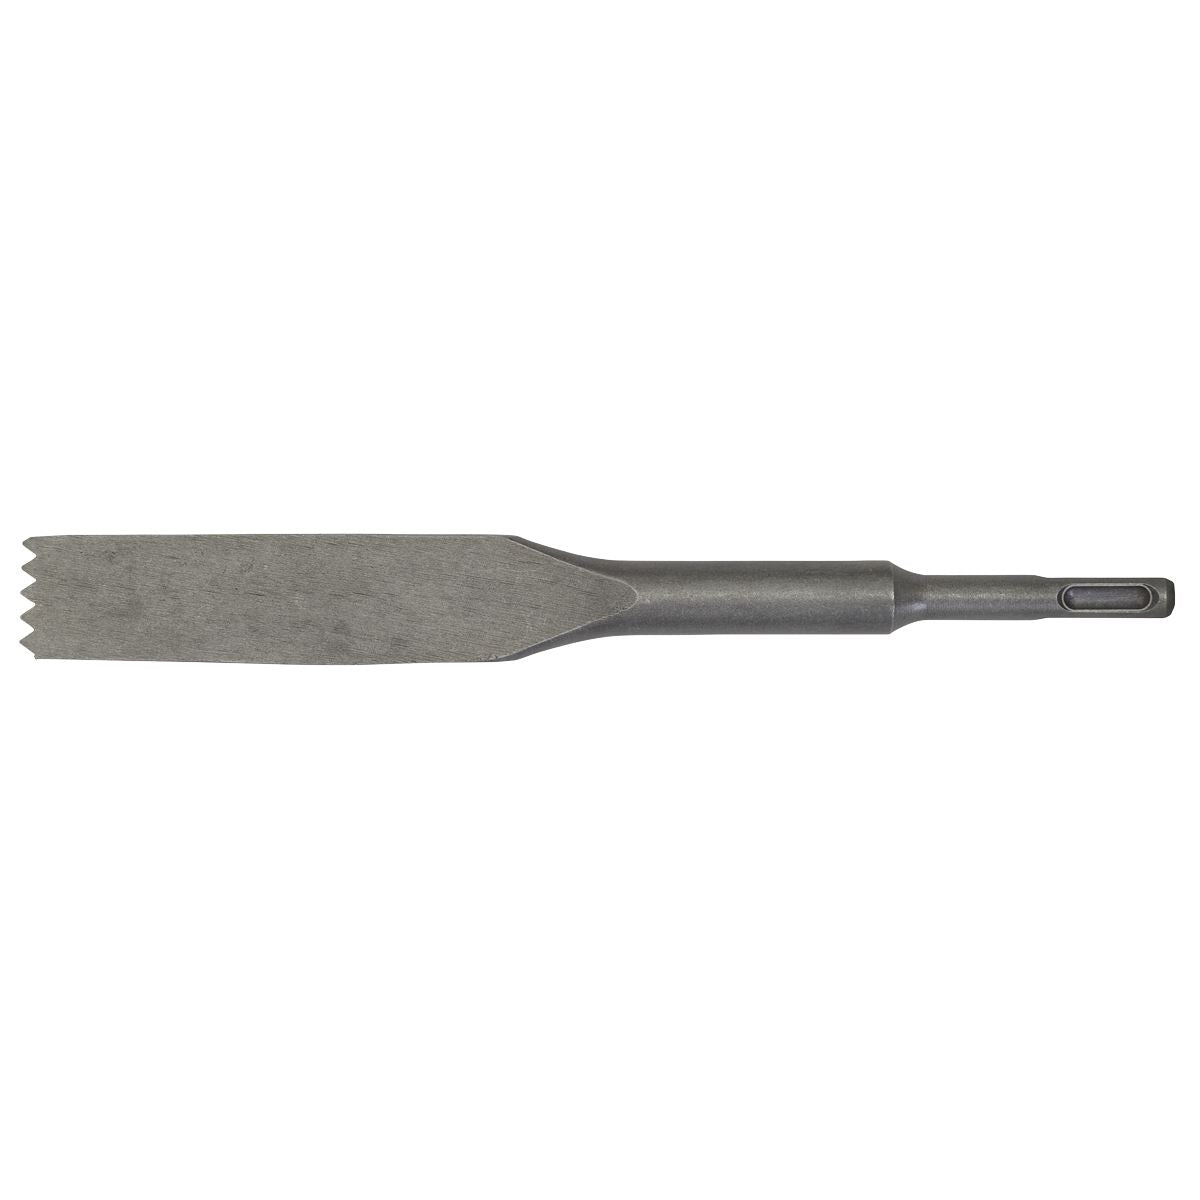 Worksafe by Sealey Toothed Mortar/Comb Chisel 30 x 250mm - SDS Plus